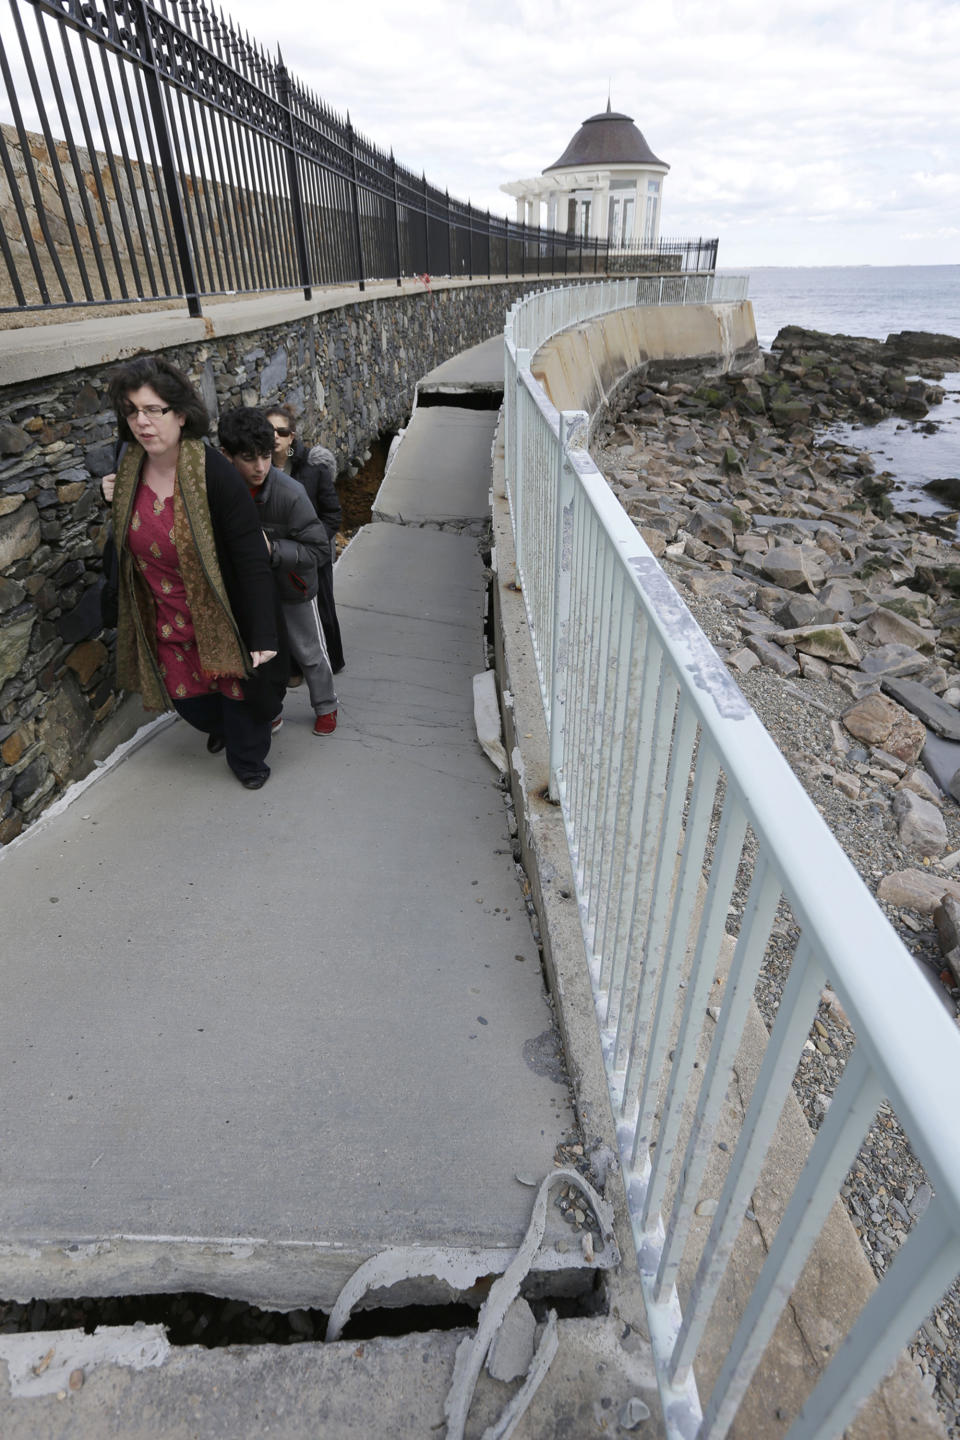 FILE - In this Wednesday, March 27, 2013 file photo, Jeanine Chada, of New York, front left, makes her way along a sunken and damaged portion of the Cliff Walk, in Newport, R.I. Large portions of the Cliff Walk damaged by Superstorm Sandy have yet to be repaired as the summer tourist season approaches. (AP Photo/Steven Senne, File)